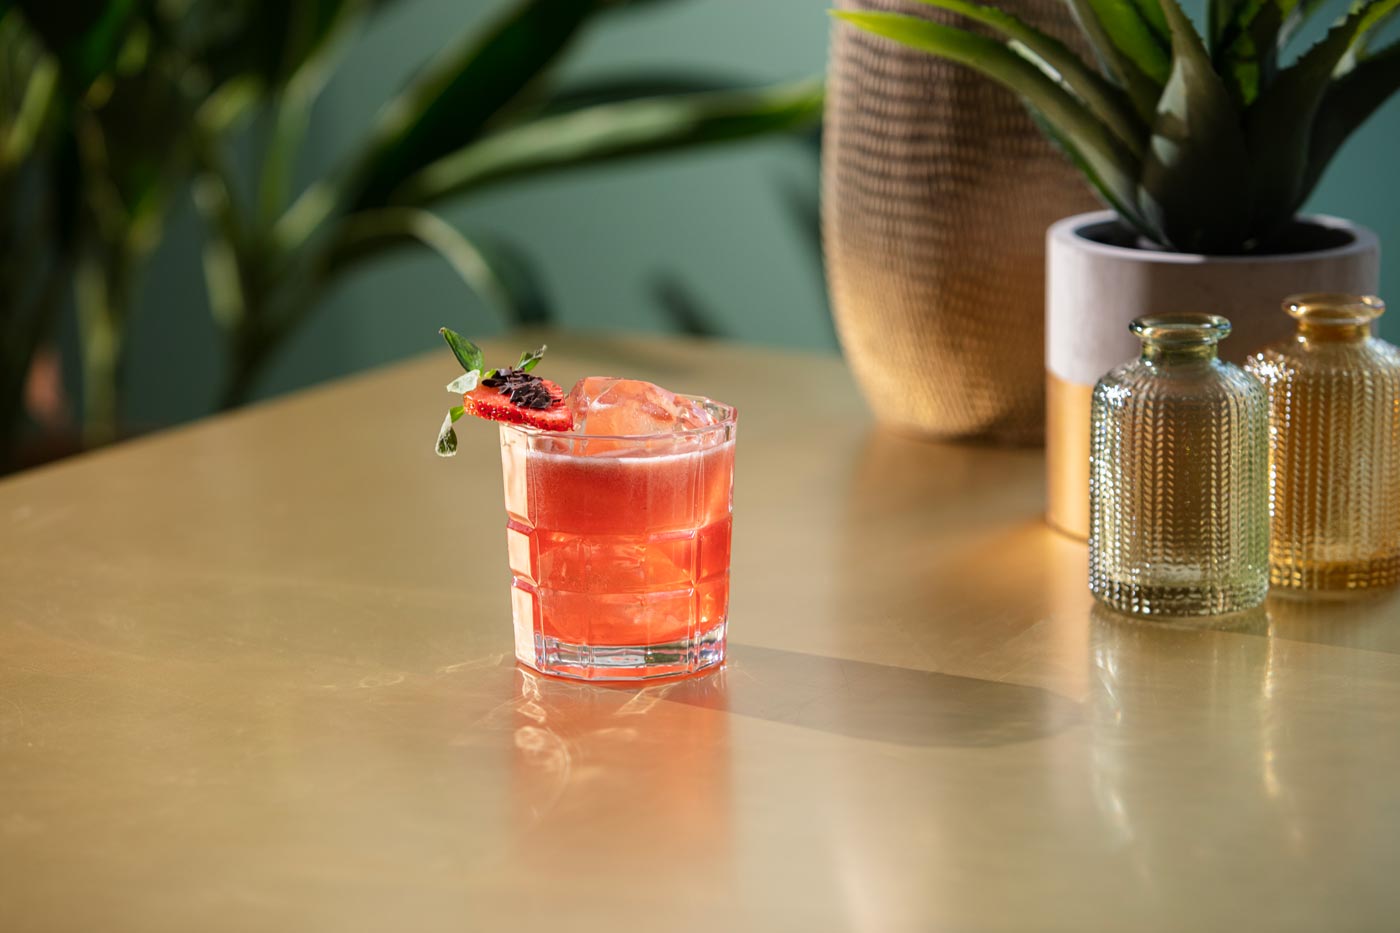 A short rocks glass is on a gold table. The glass contains a pink drink that has been topped with a slice of strawberry and some chocolate shavings. In the background we can see some plant pots.